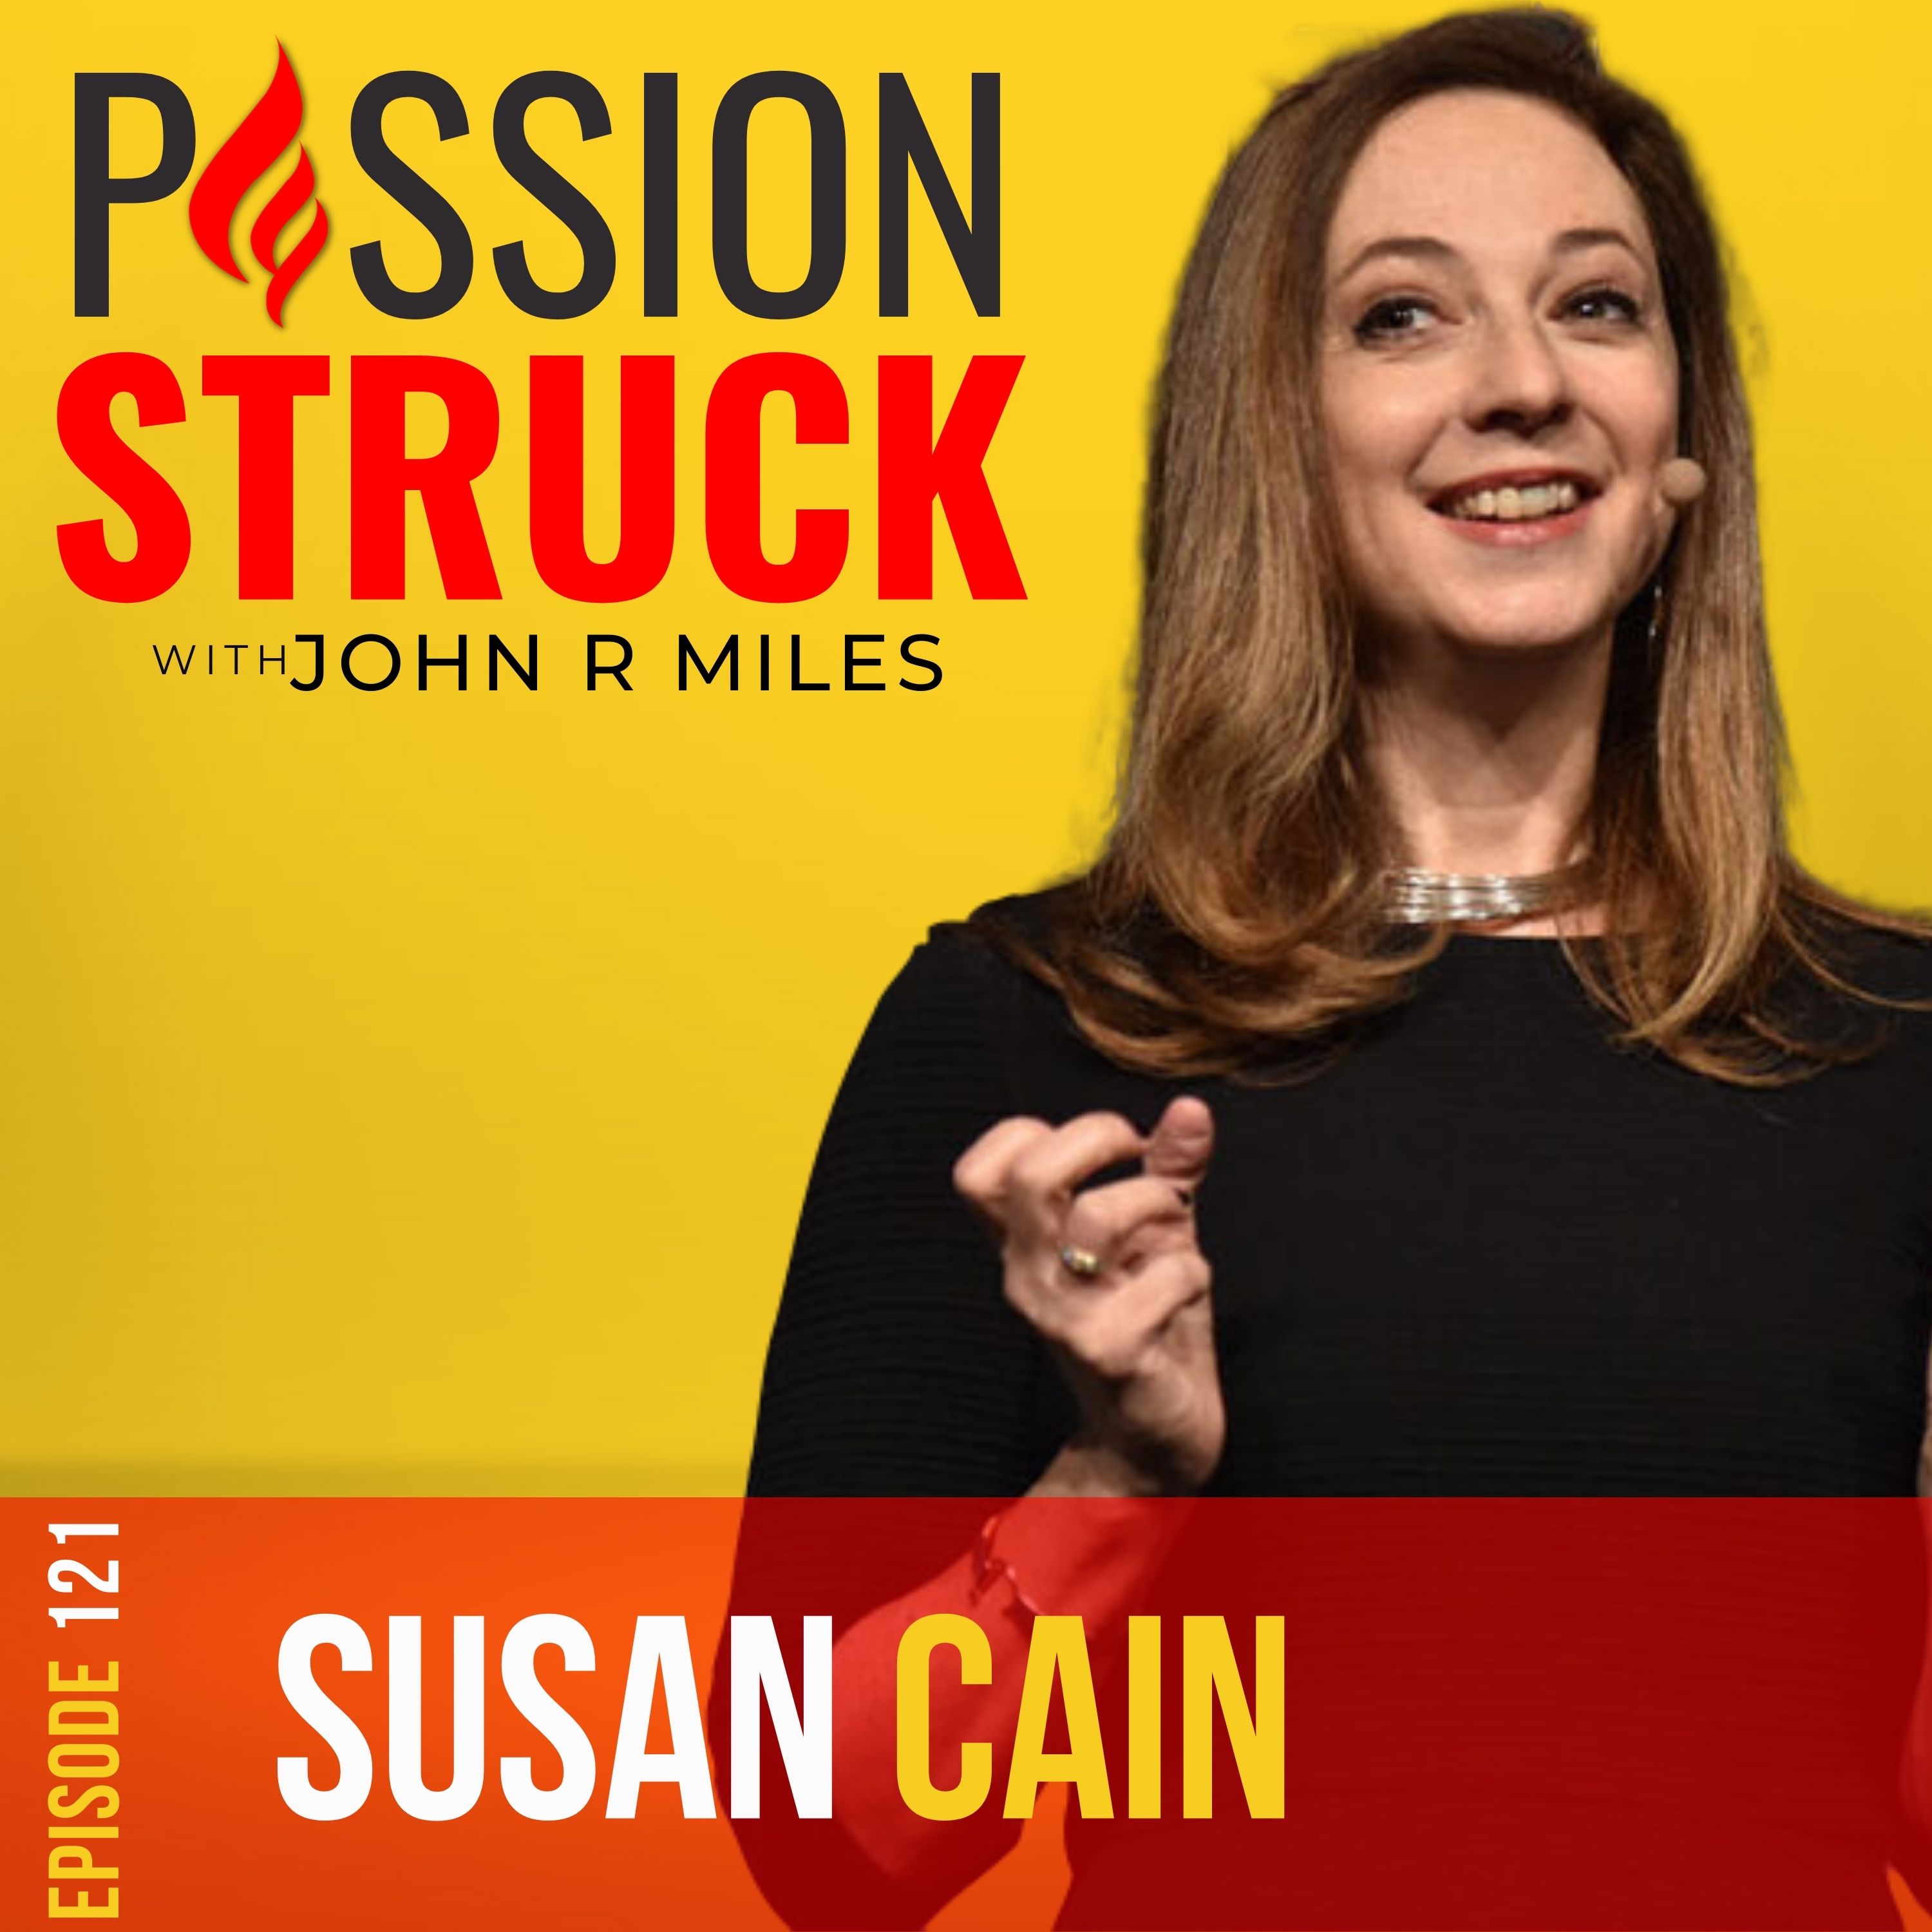 Susan Cain picture for passion struck with John R. Miles